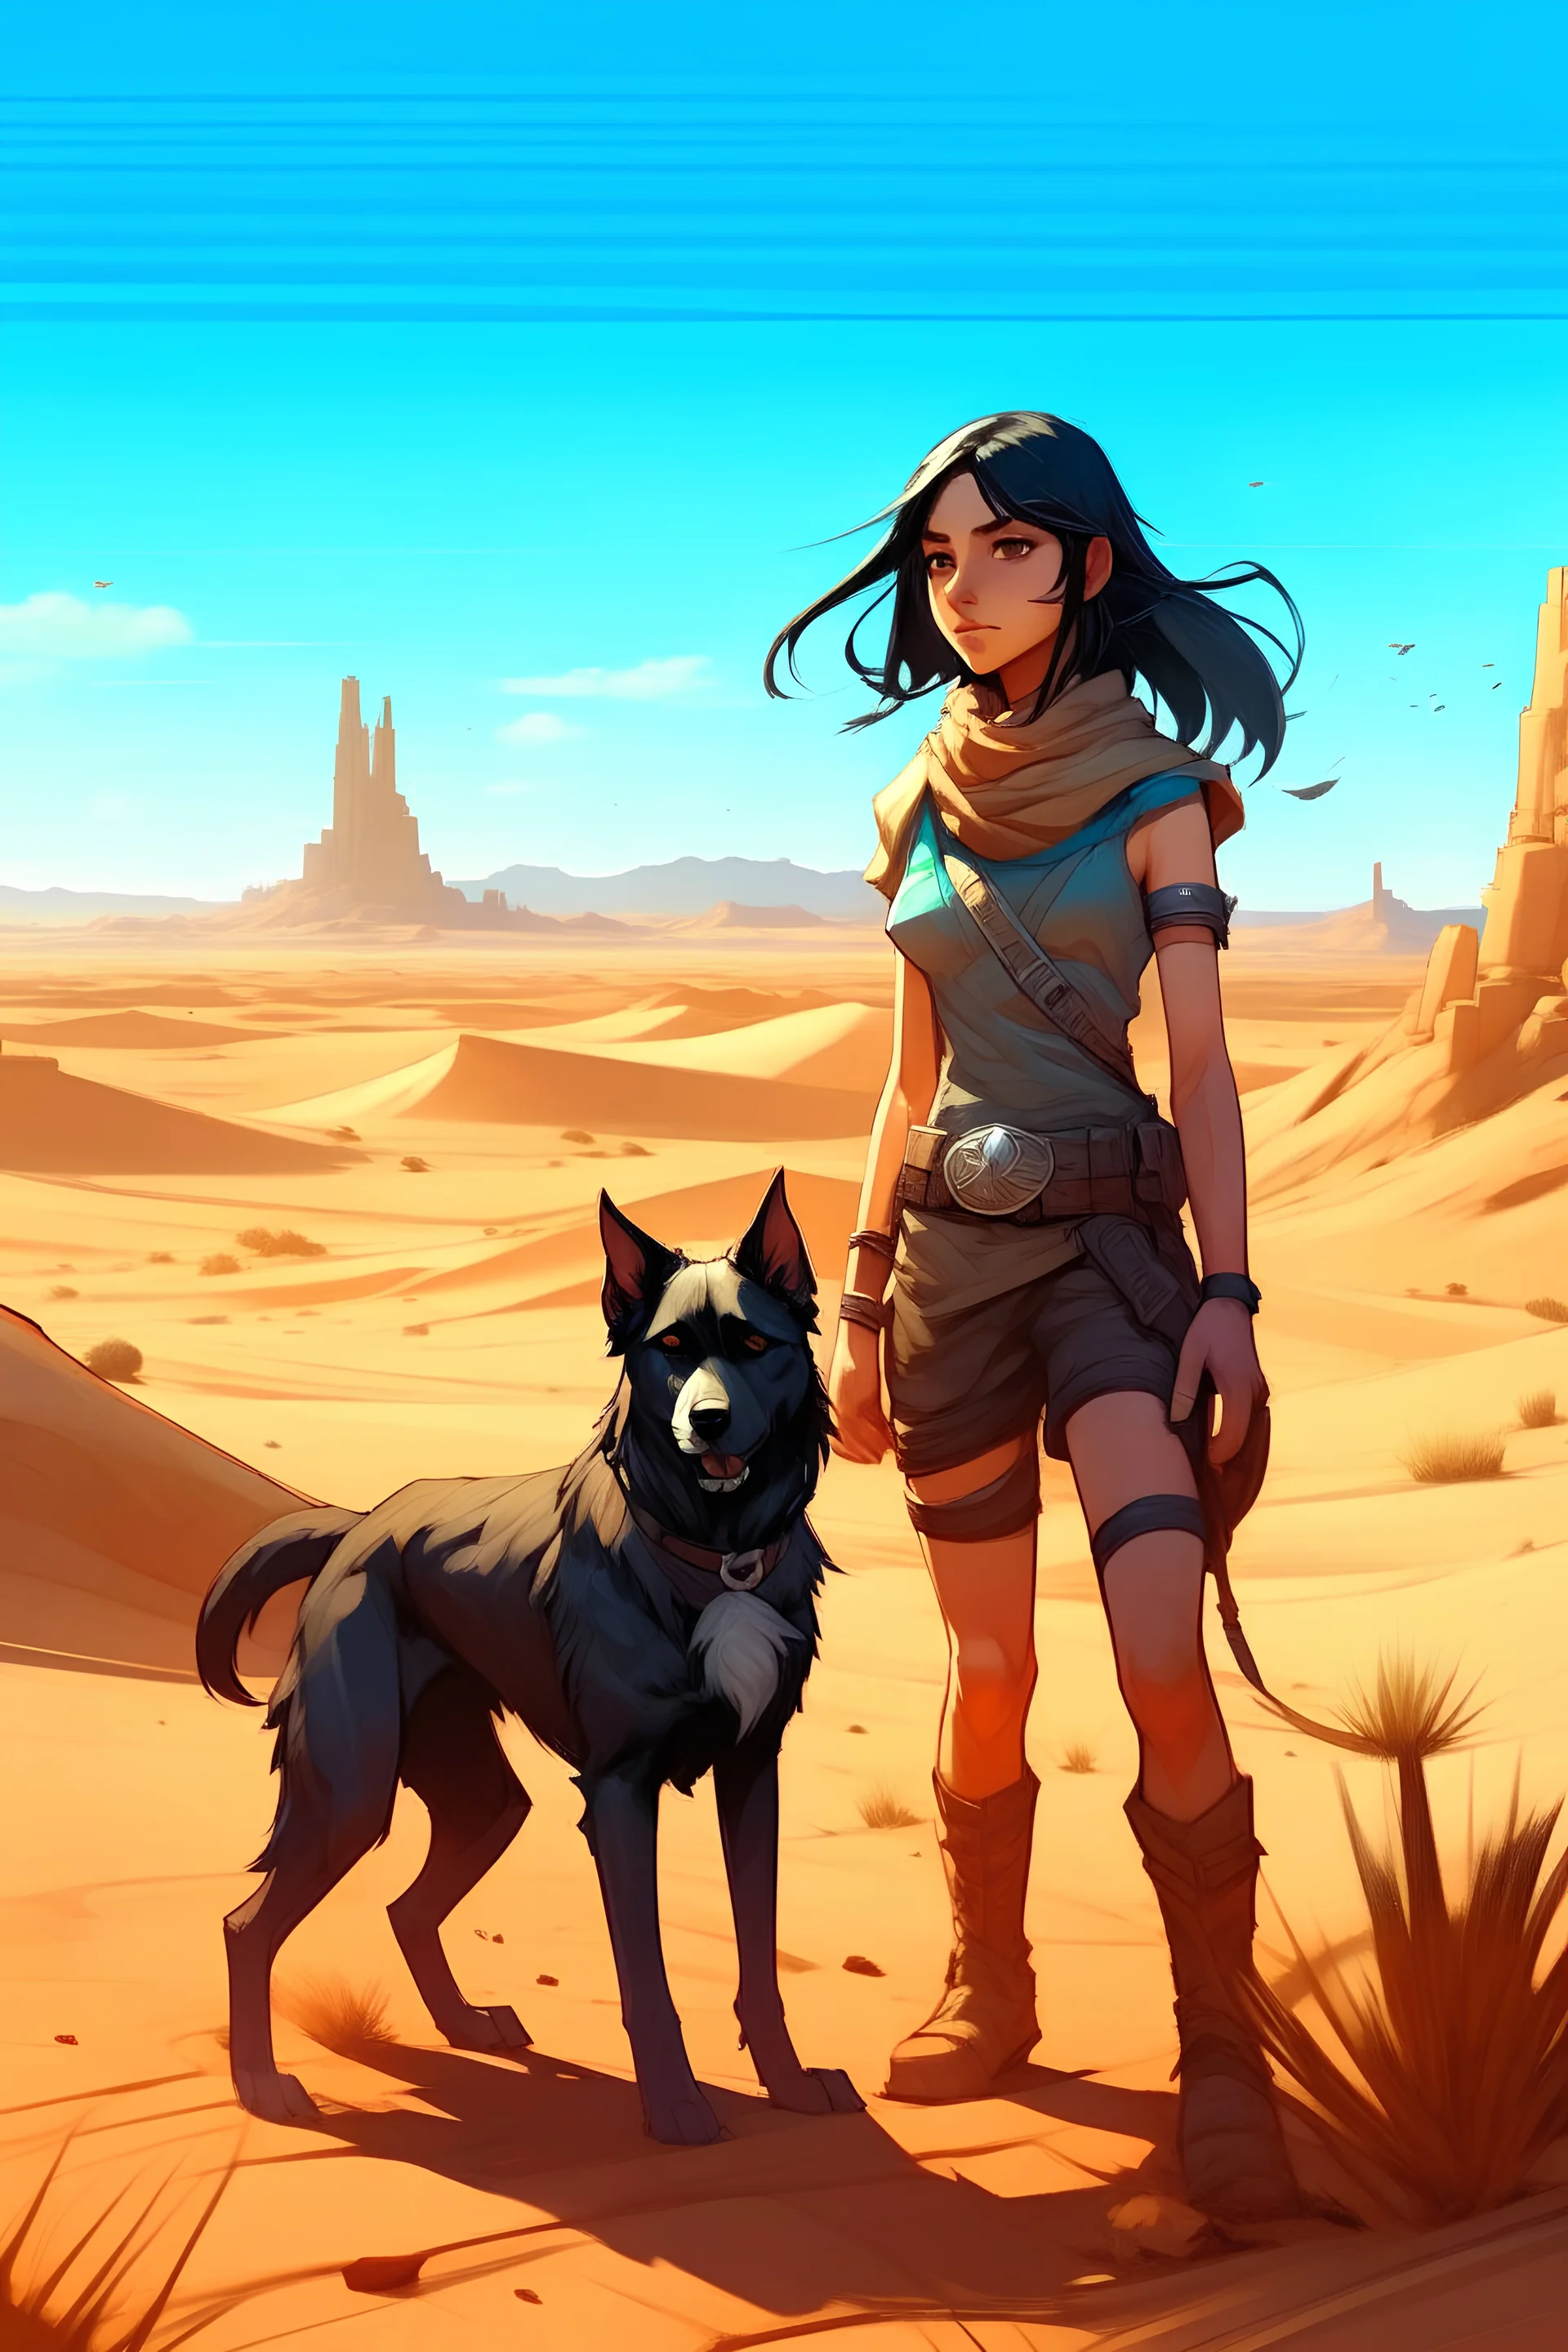 A black haired bronzed girl in the desert with her dog. The dunes are sandy. Draw it all in the style of Horizon Zero Dawn